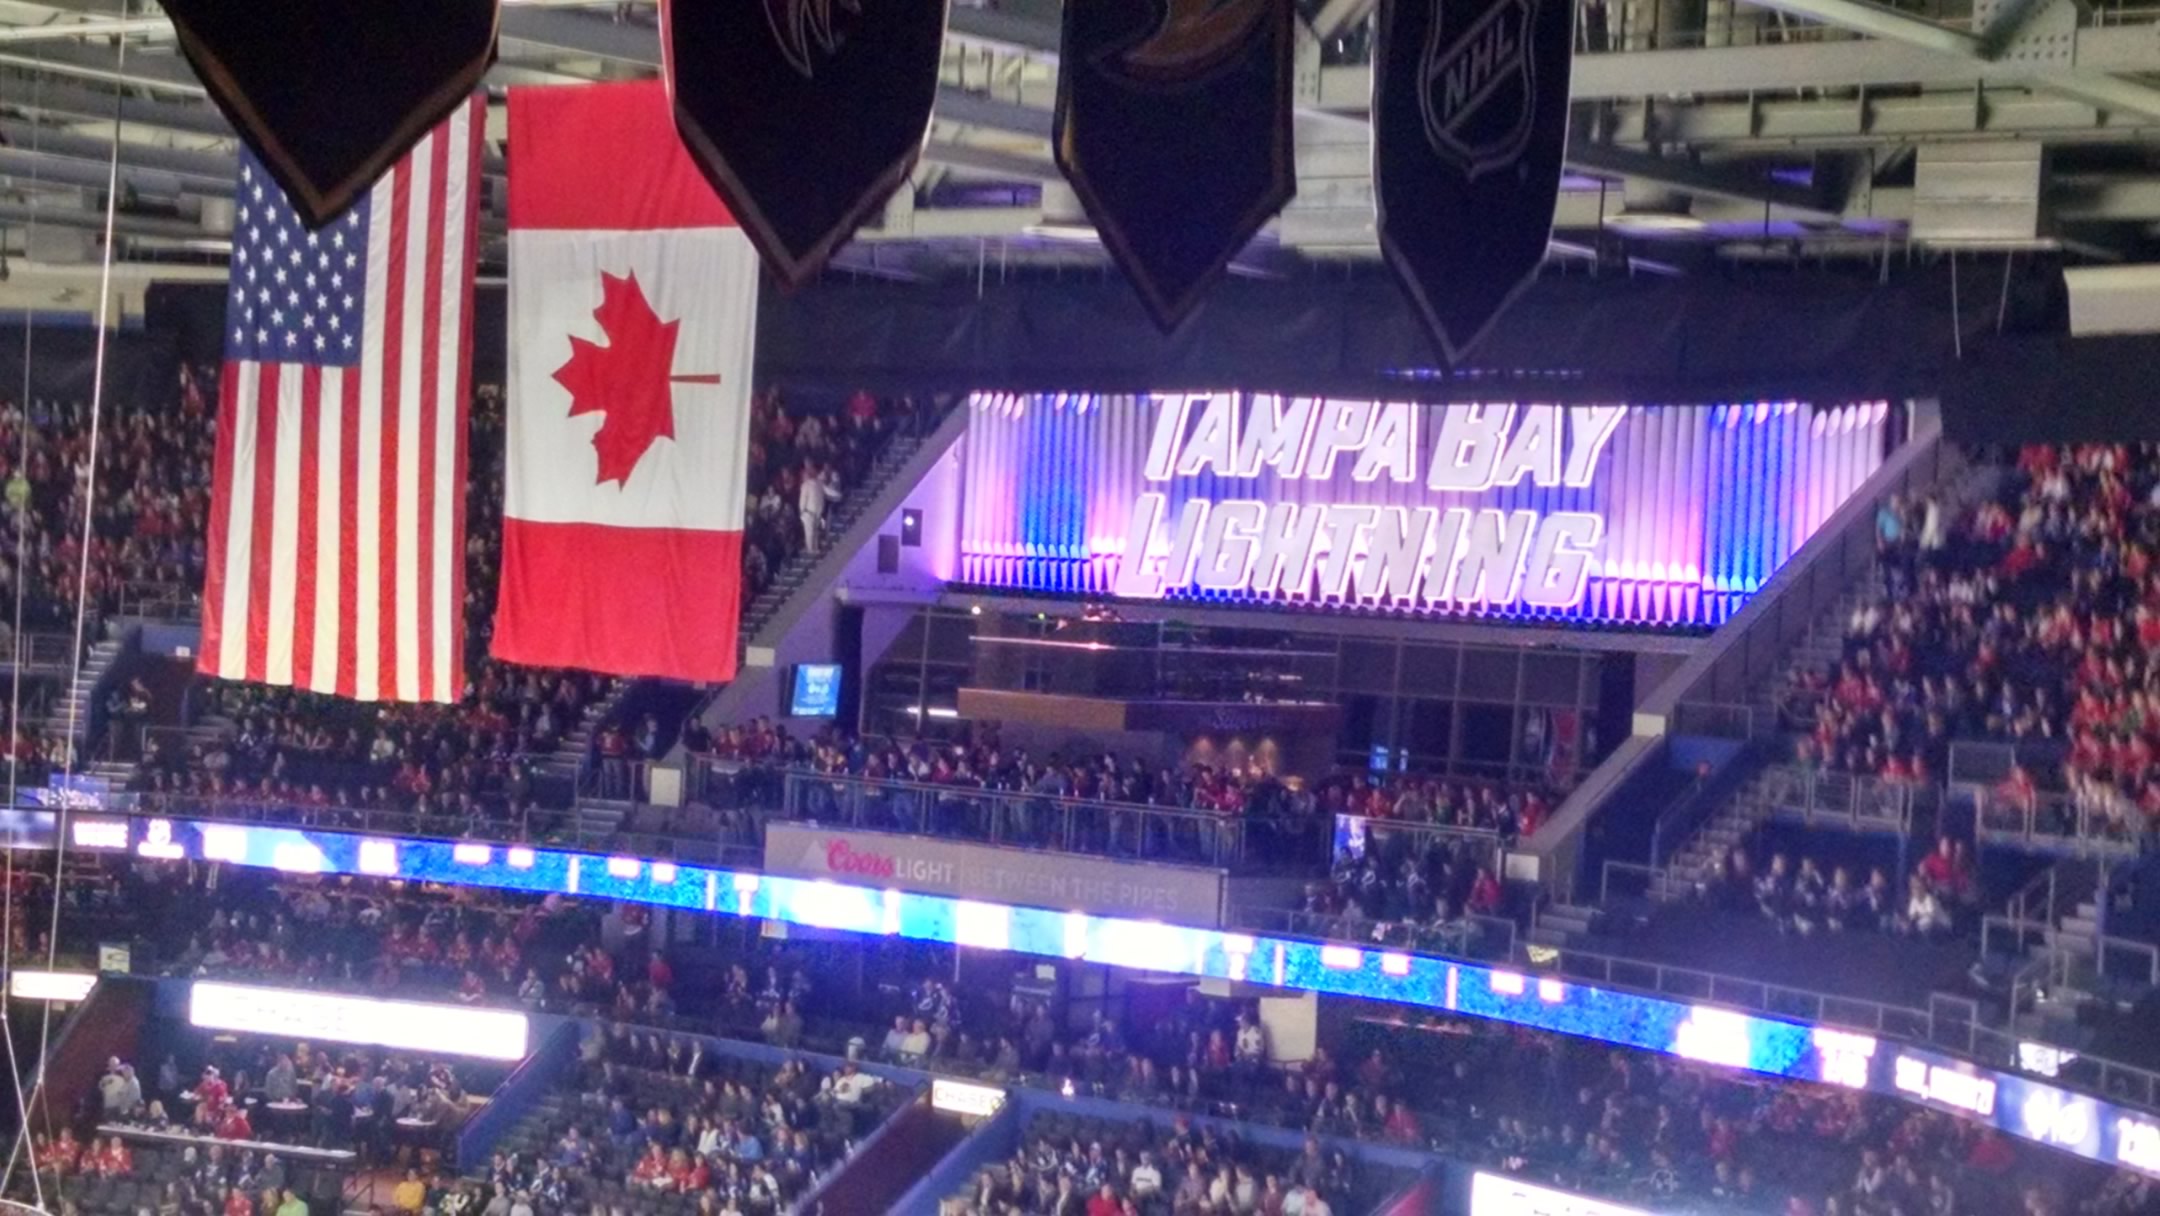 Best and Worst Seats at Amalie Arena: Your Ultimate Guide - The Stadiums  Guide